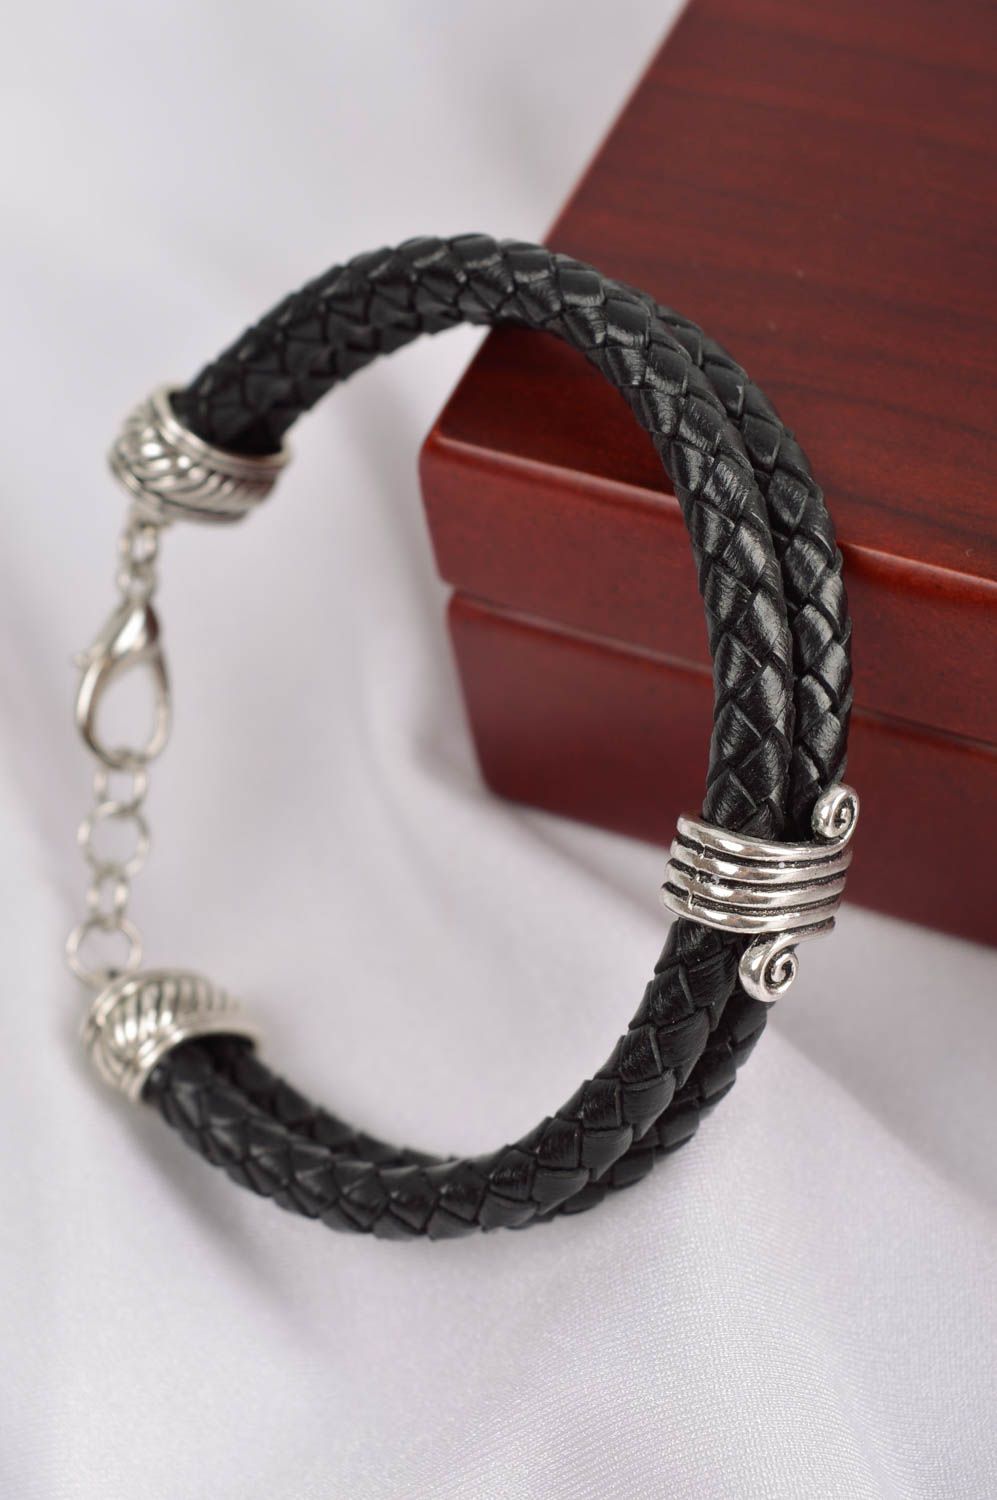 Handmade leather bracelet fashion accessories cool jewelry designs small gifts photo 1